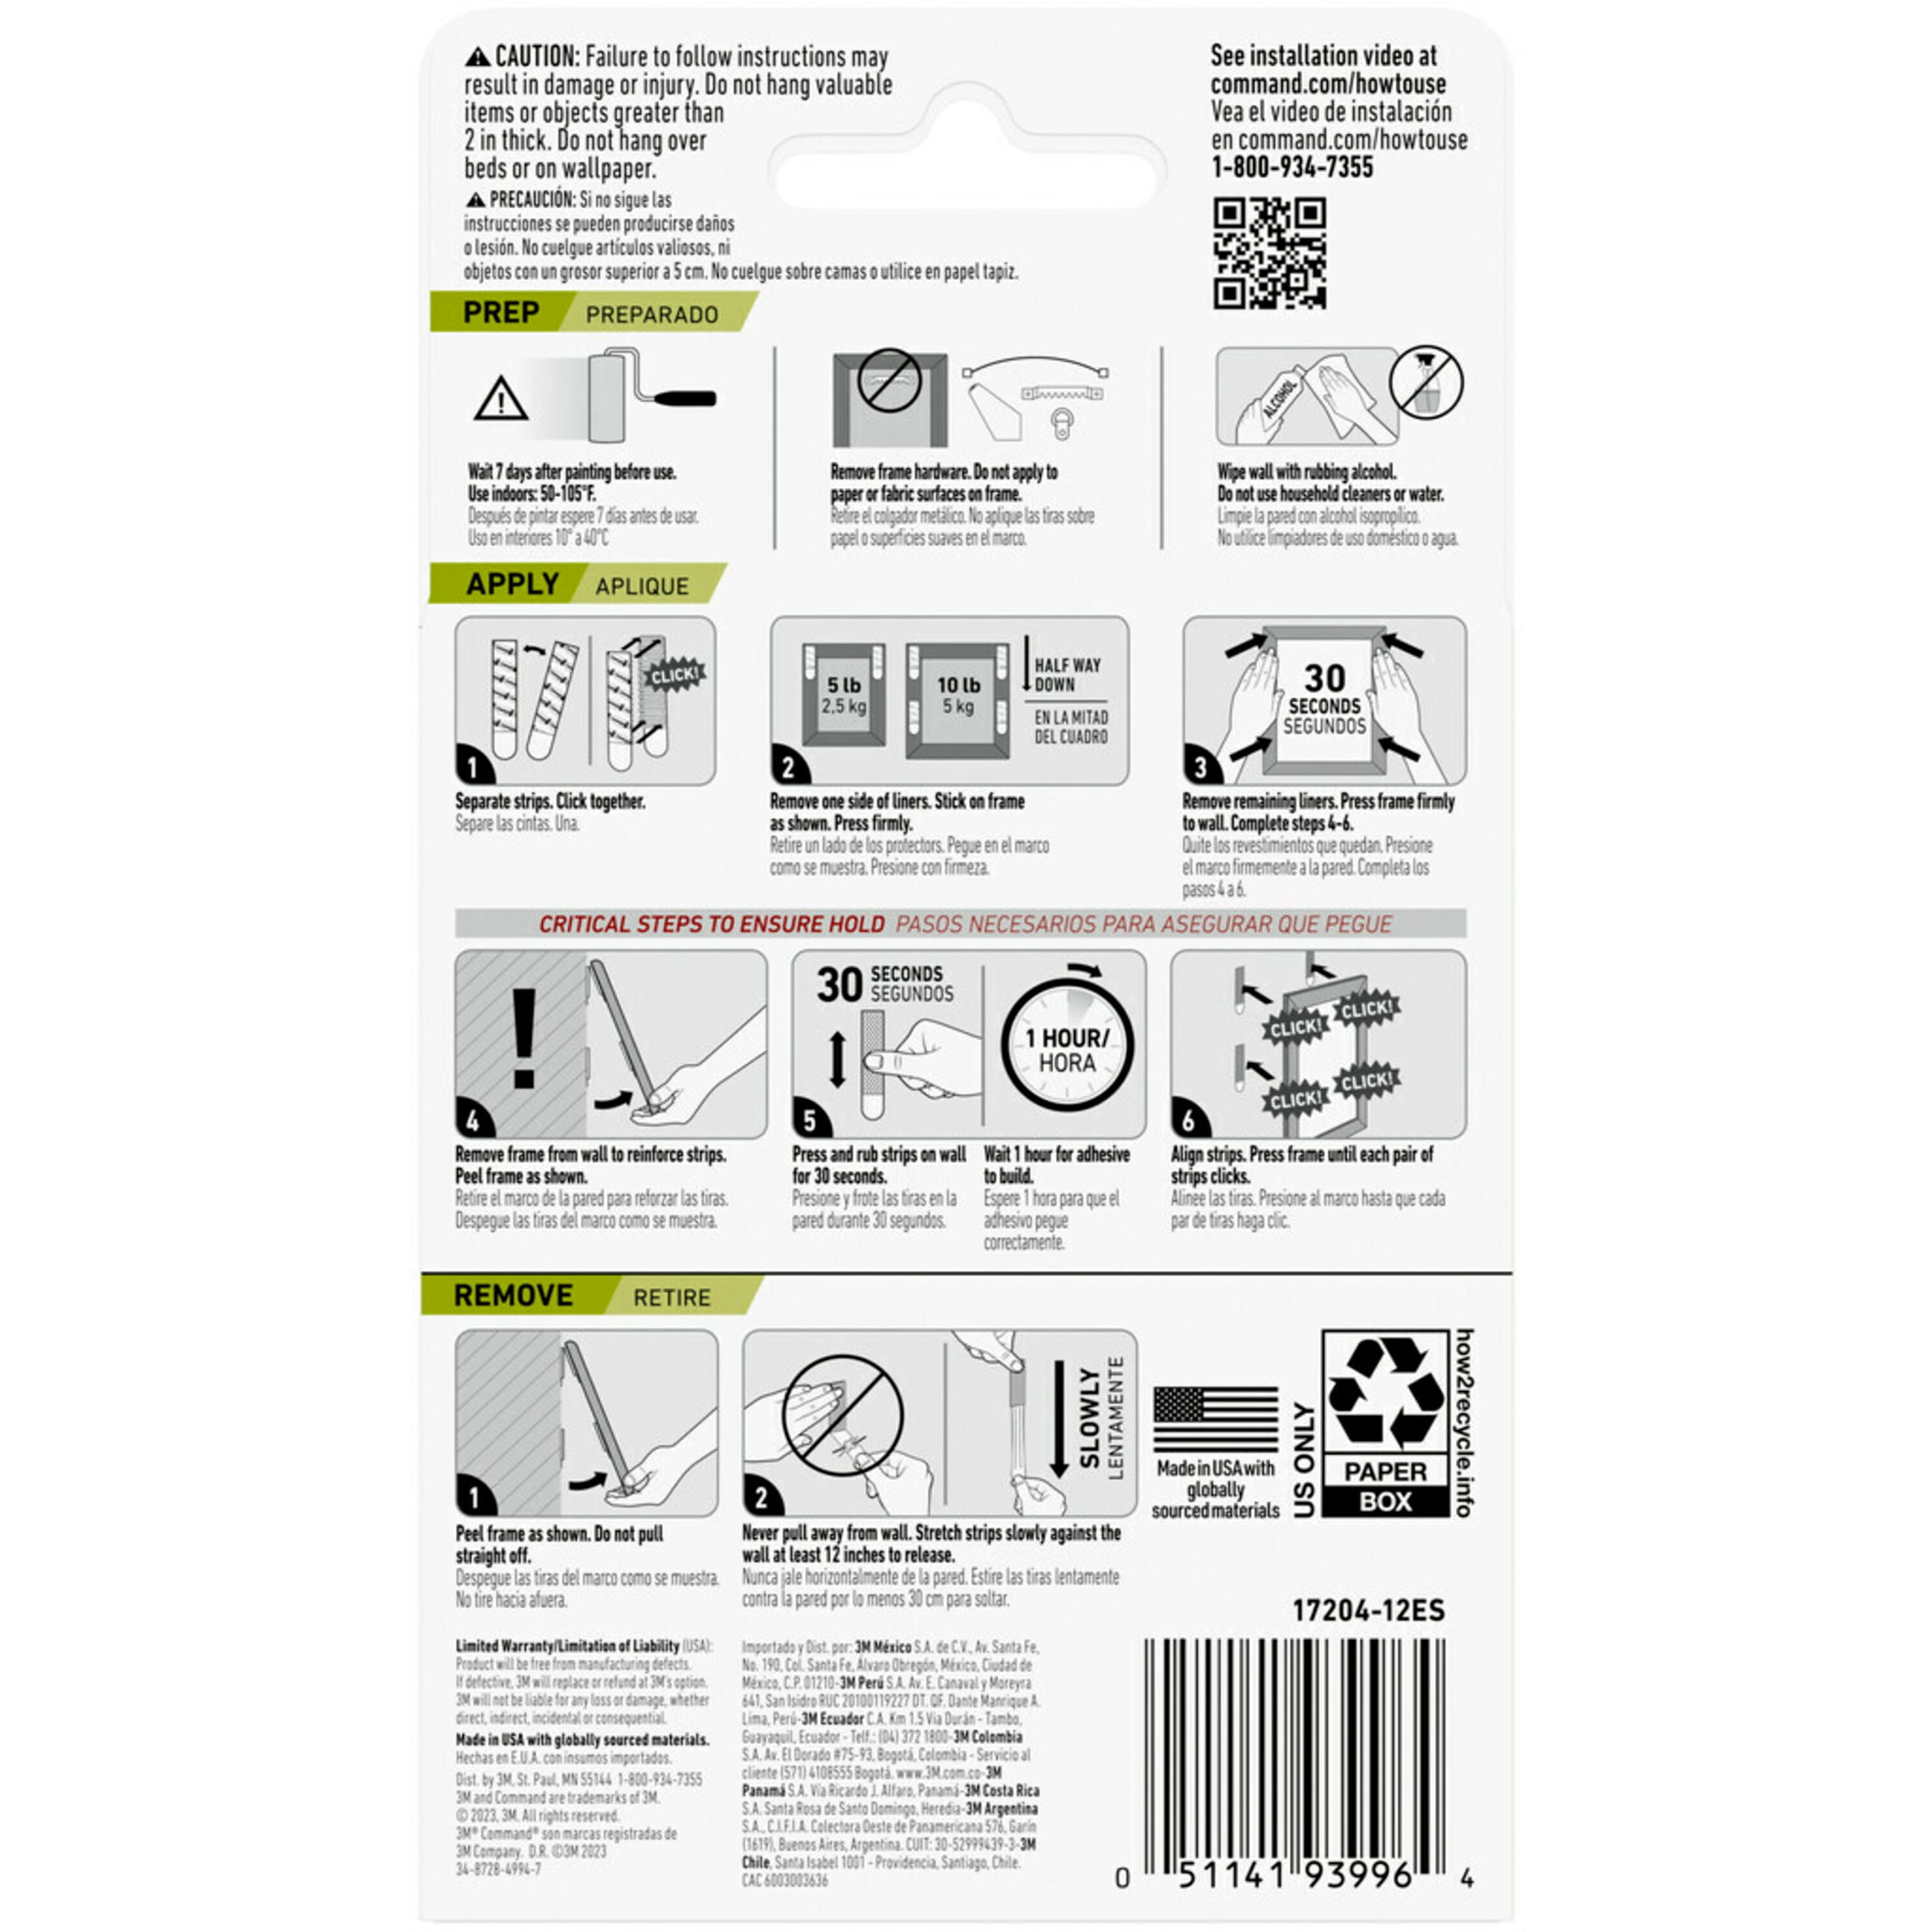 3M Command Picture Hanging Strips Combo Pack, Small and Medium - 12 count